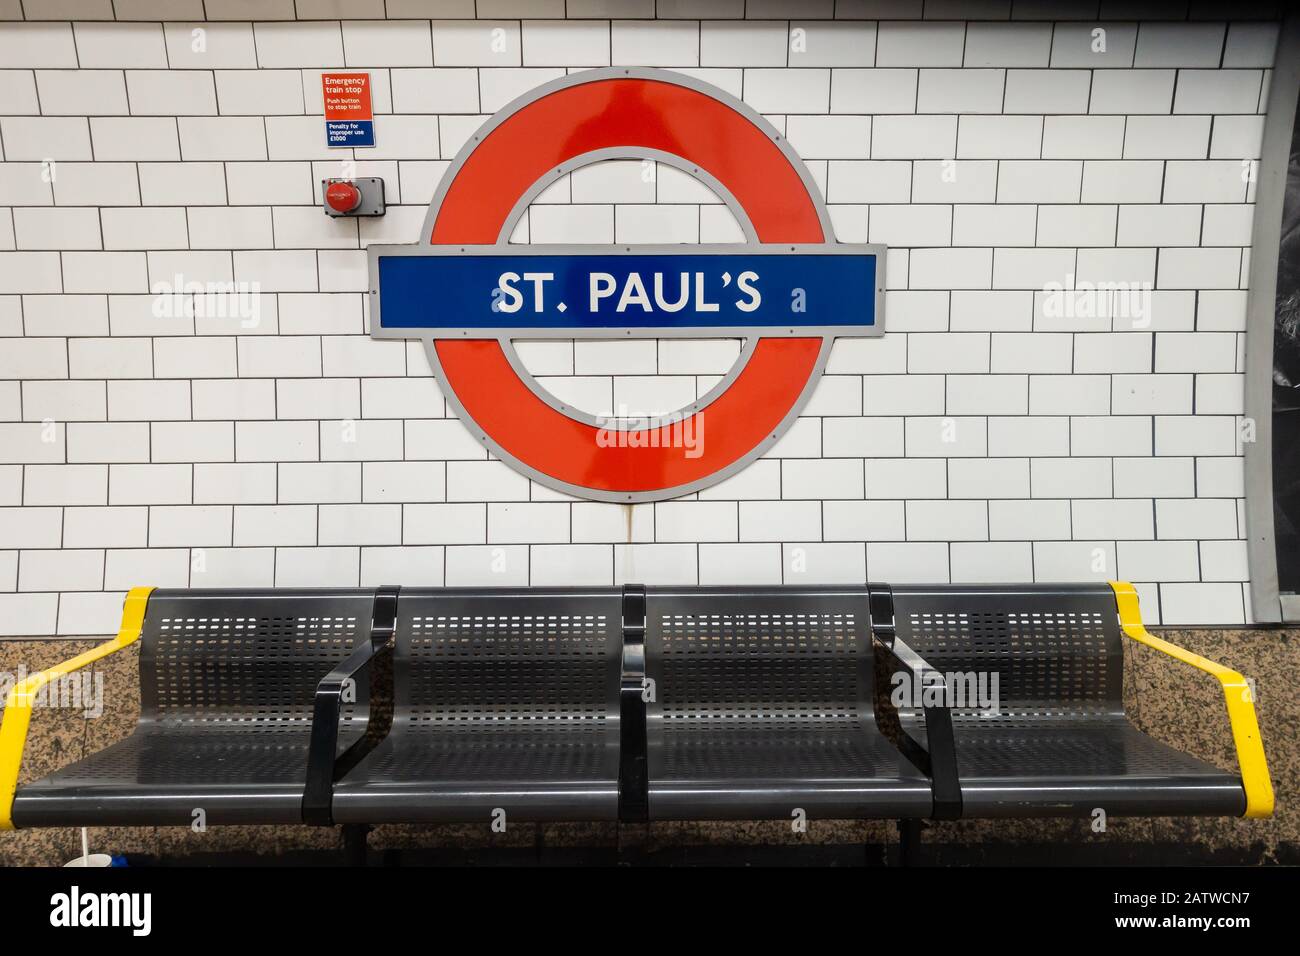 A London Underground symbol on the wall of St Paul's station above a row of seats. Stock Photo